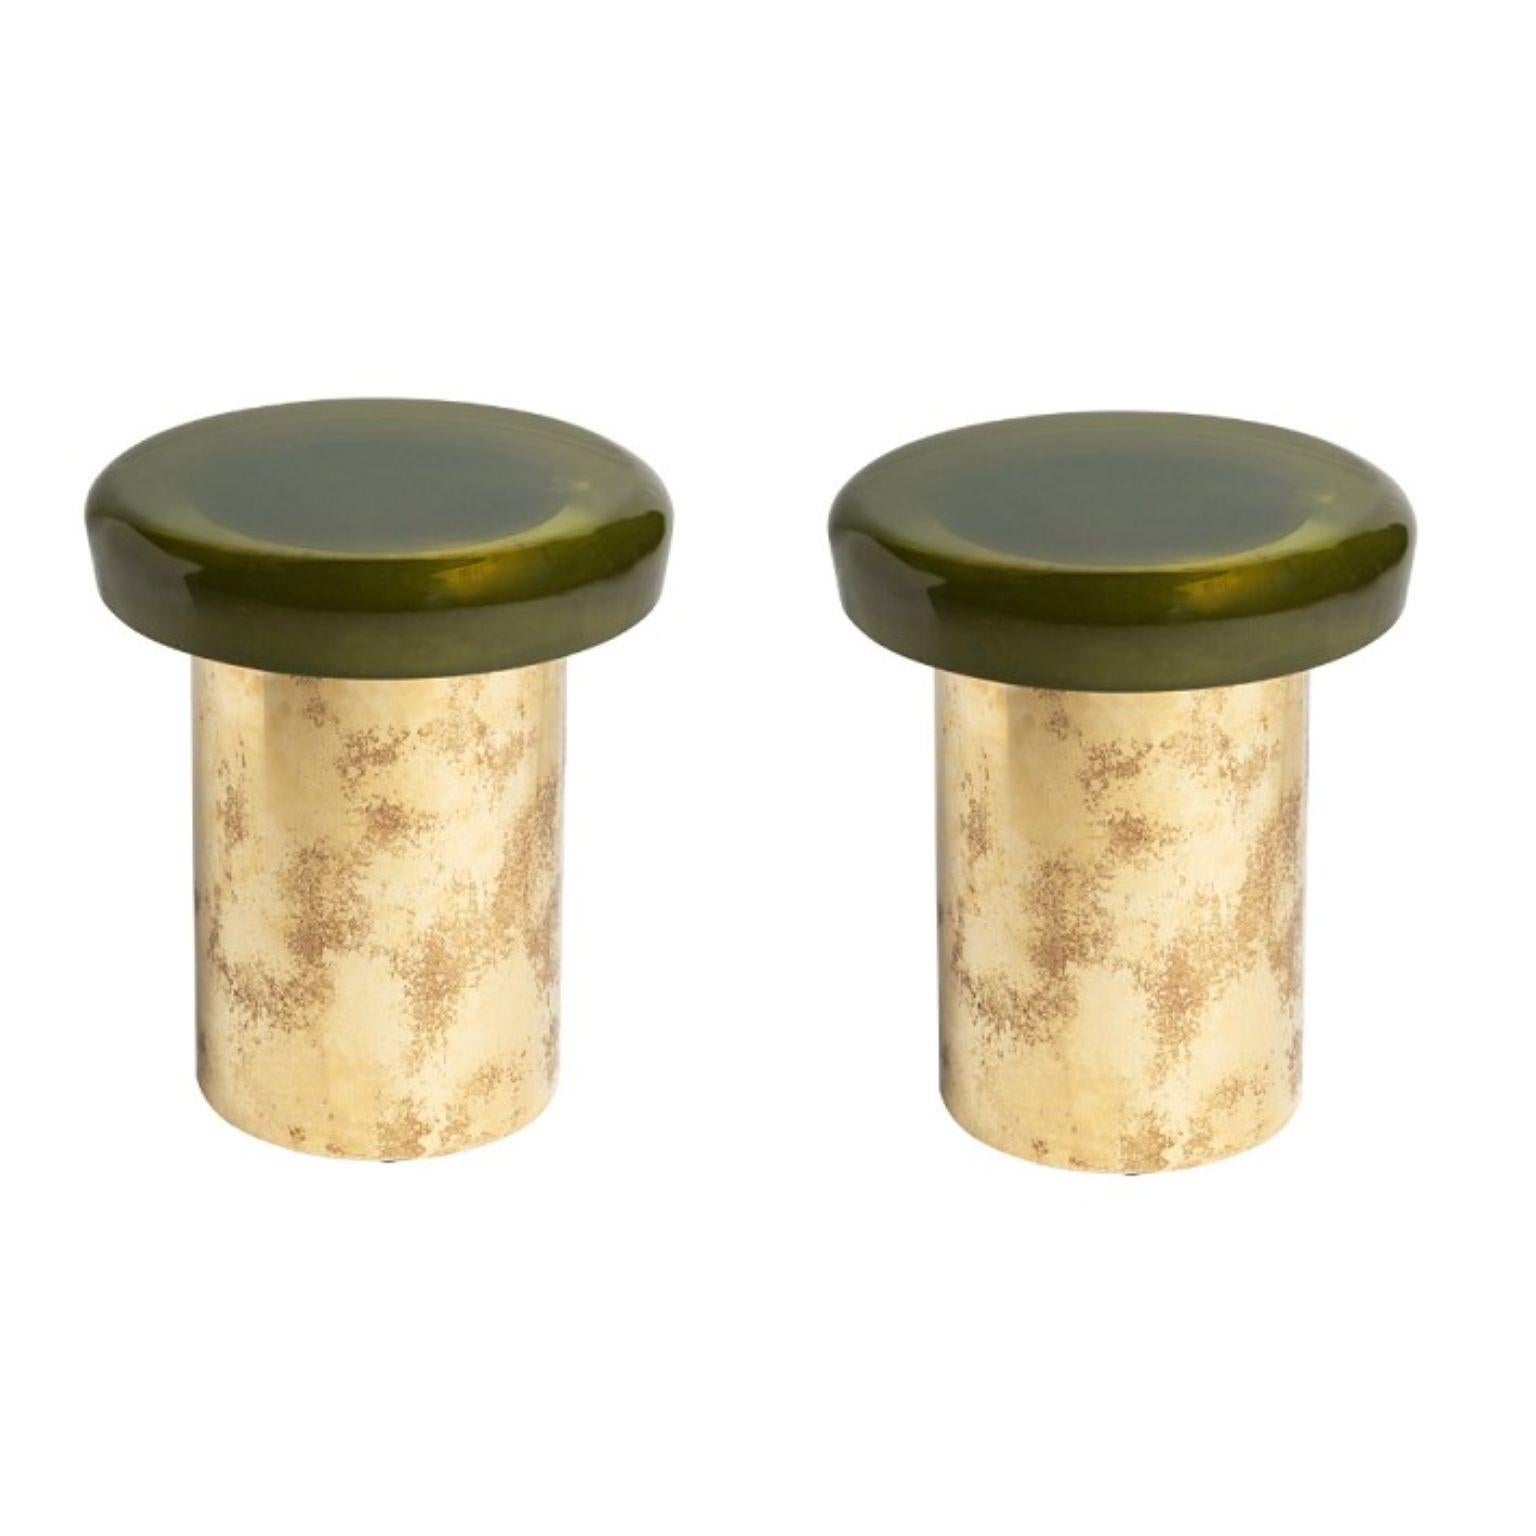 Set of 2 jade stools by Draga & Aurel
Dimensions: W 40, D 40, H 46, top Ø 40 cm
Materials: Resin and bronze

Formed from a combination of reflective resin and solid brass, the Jade coffee tables look like precious gems. The surface is made by hand